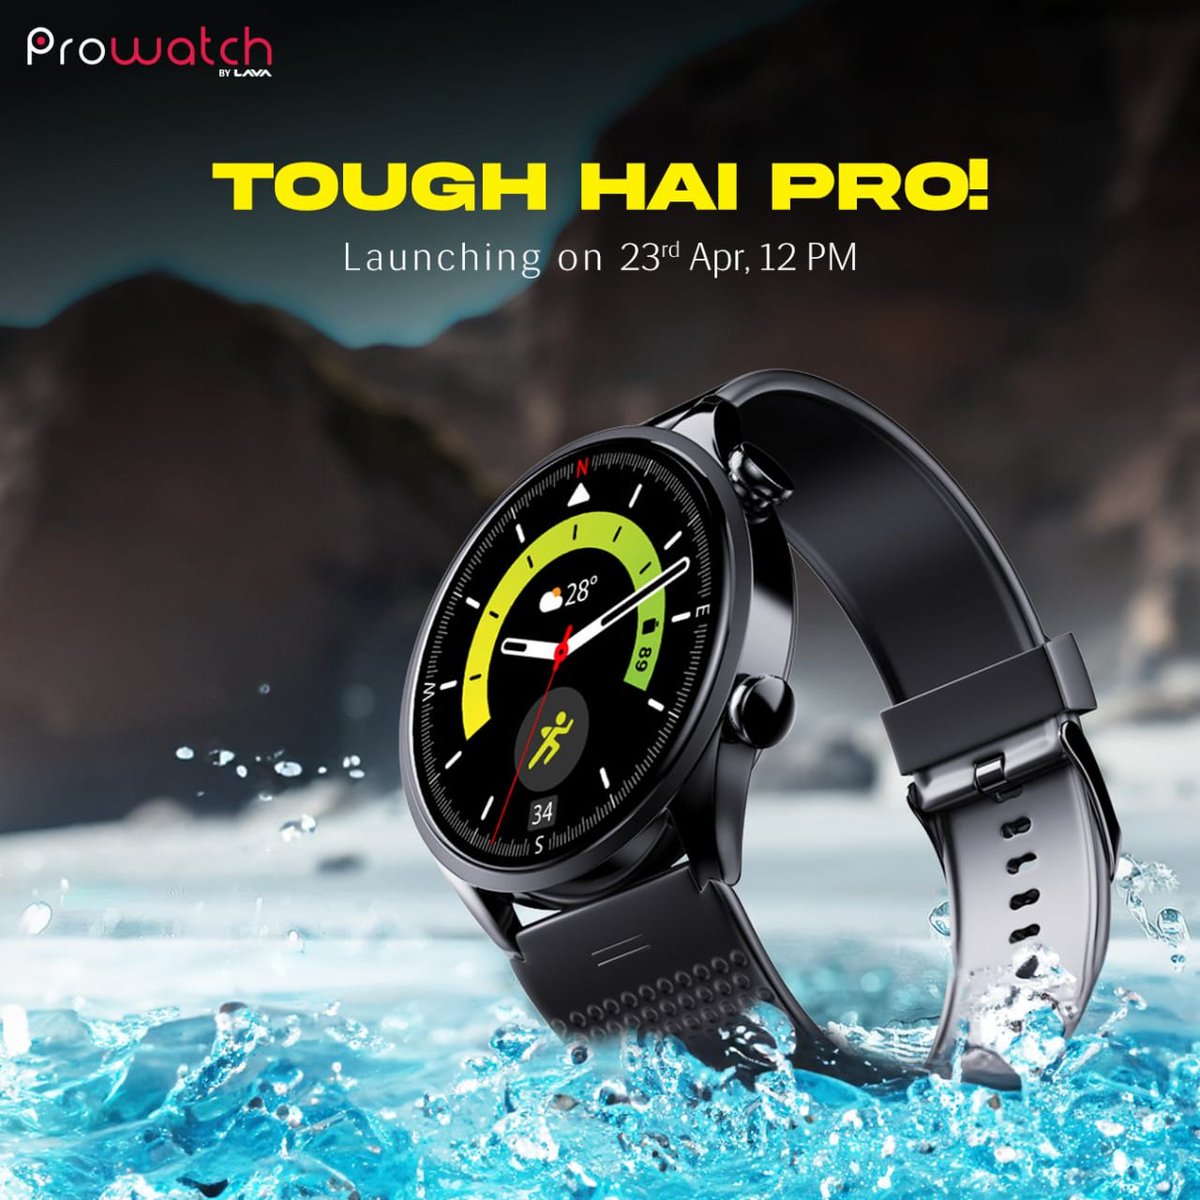 Tech lovers are really excited for this launch of lava new smart watch launching tomorrow noon

#ProwatchLaunchTomorrow